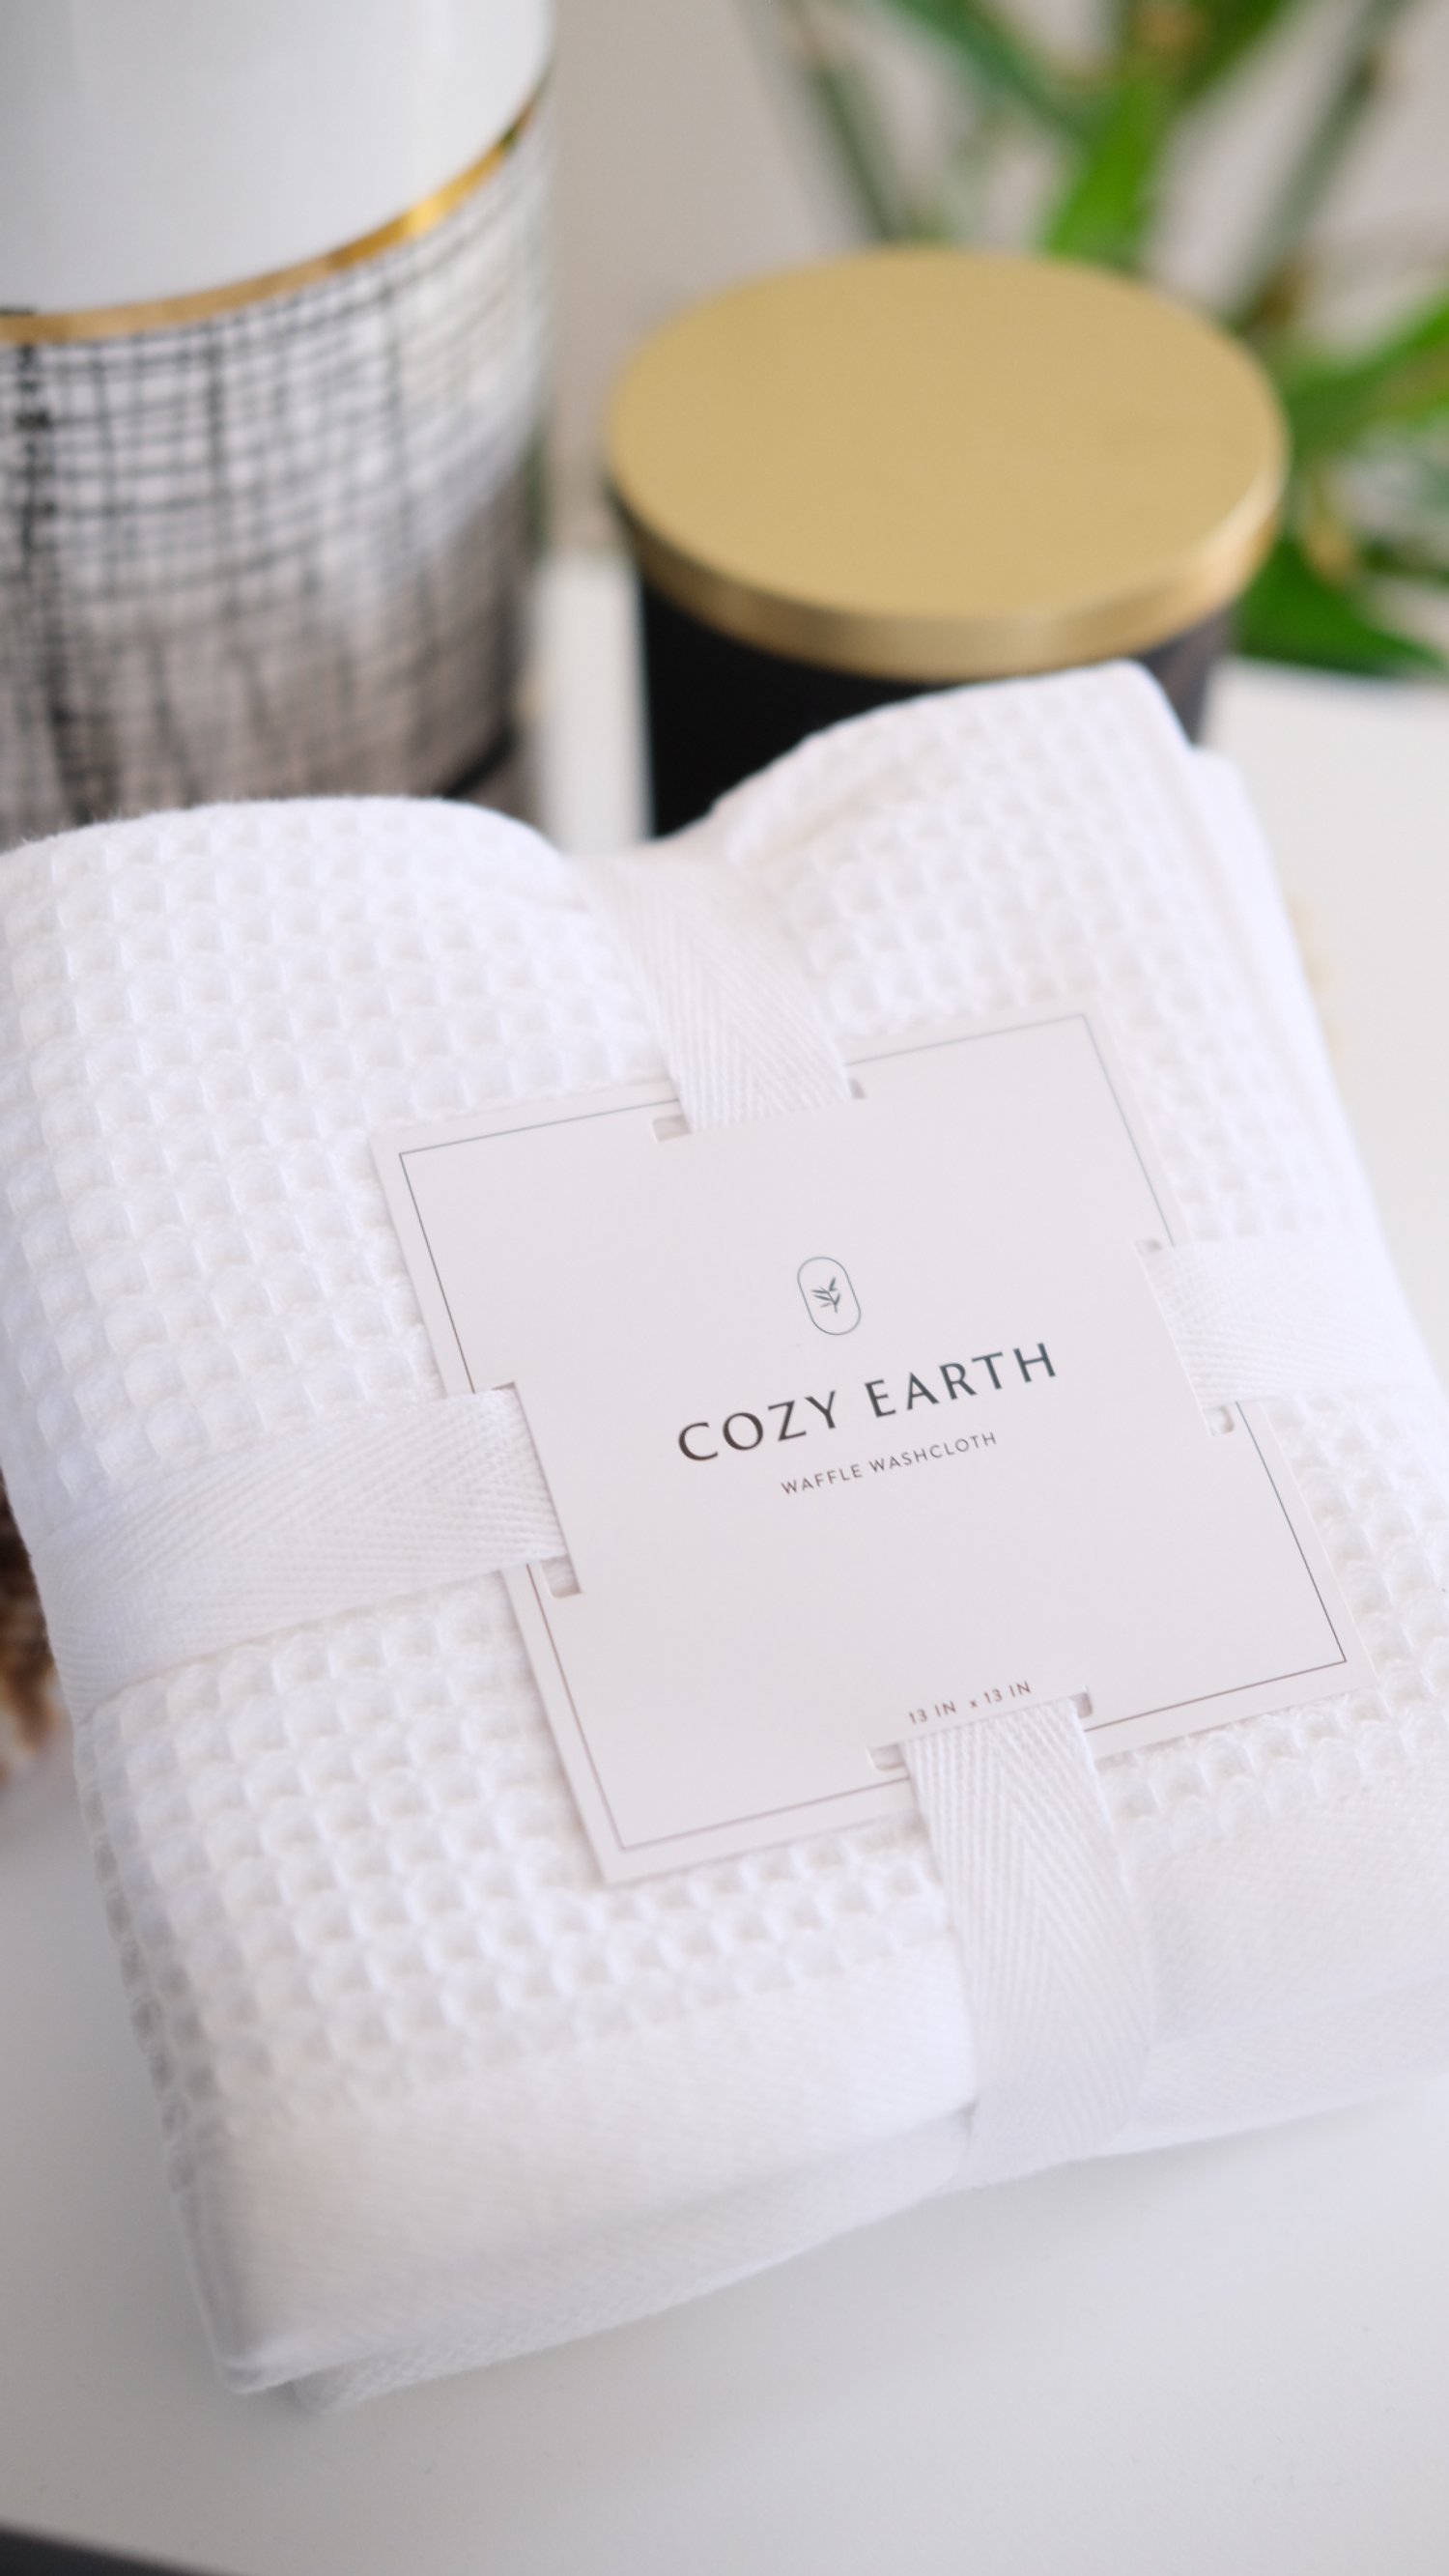 Cozy Earth Waffle Towel Review and Cozy Earth discount code